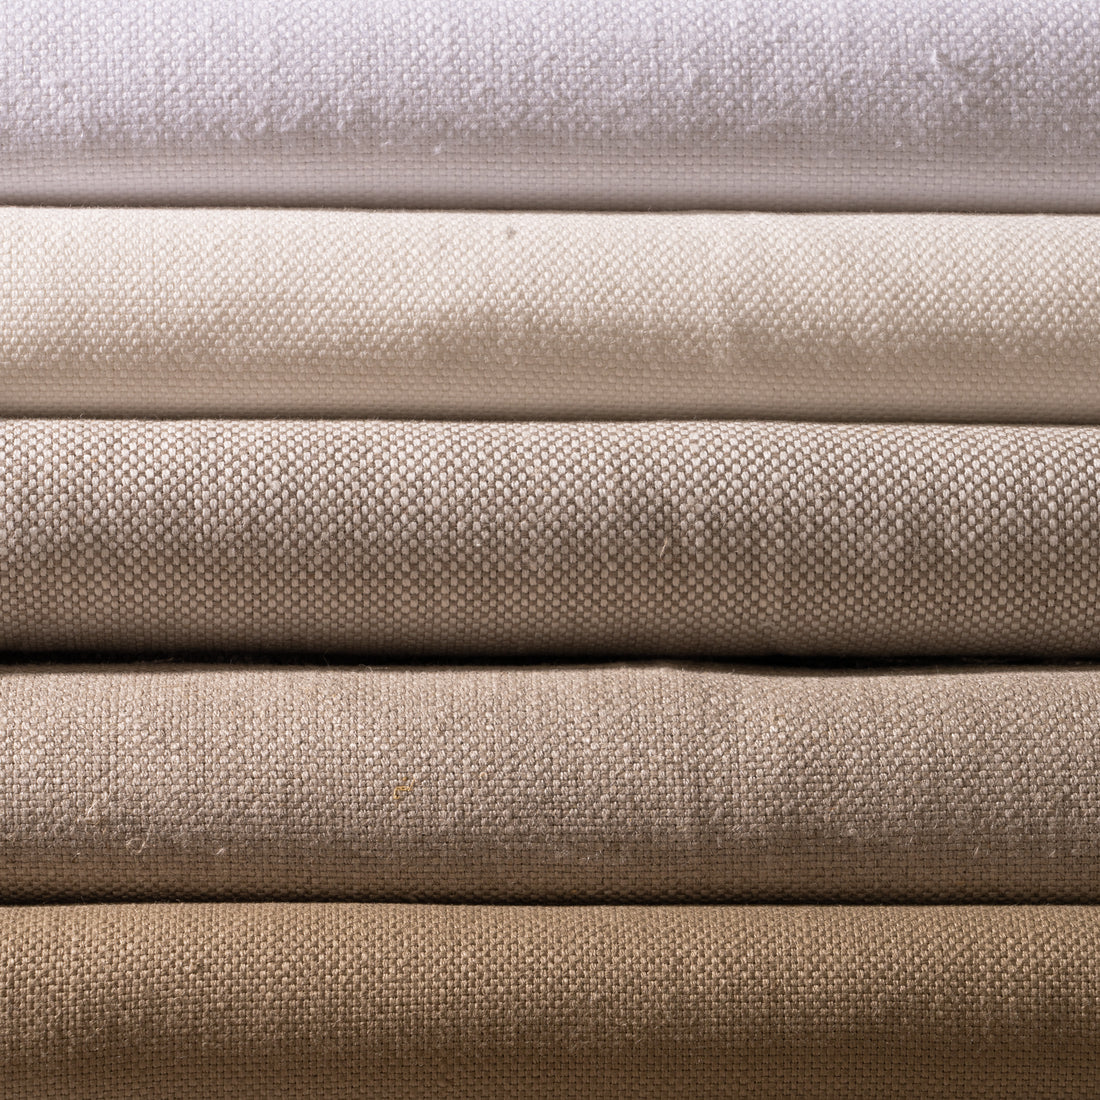 Understanding the difference between Unlaundered, Stonewashed, and Performance Linen